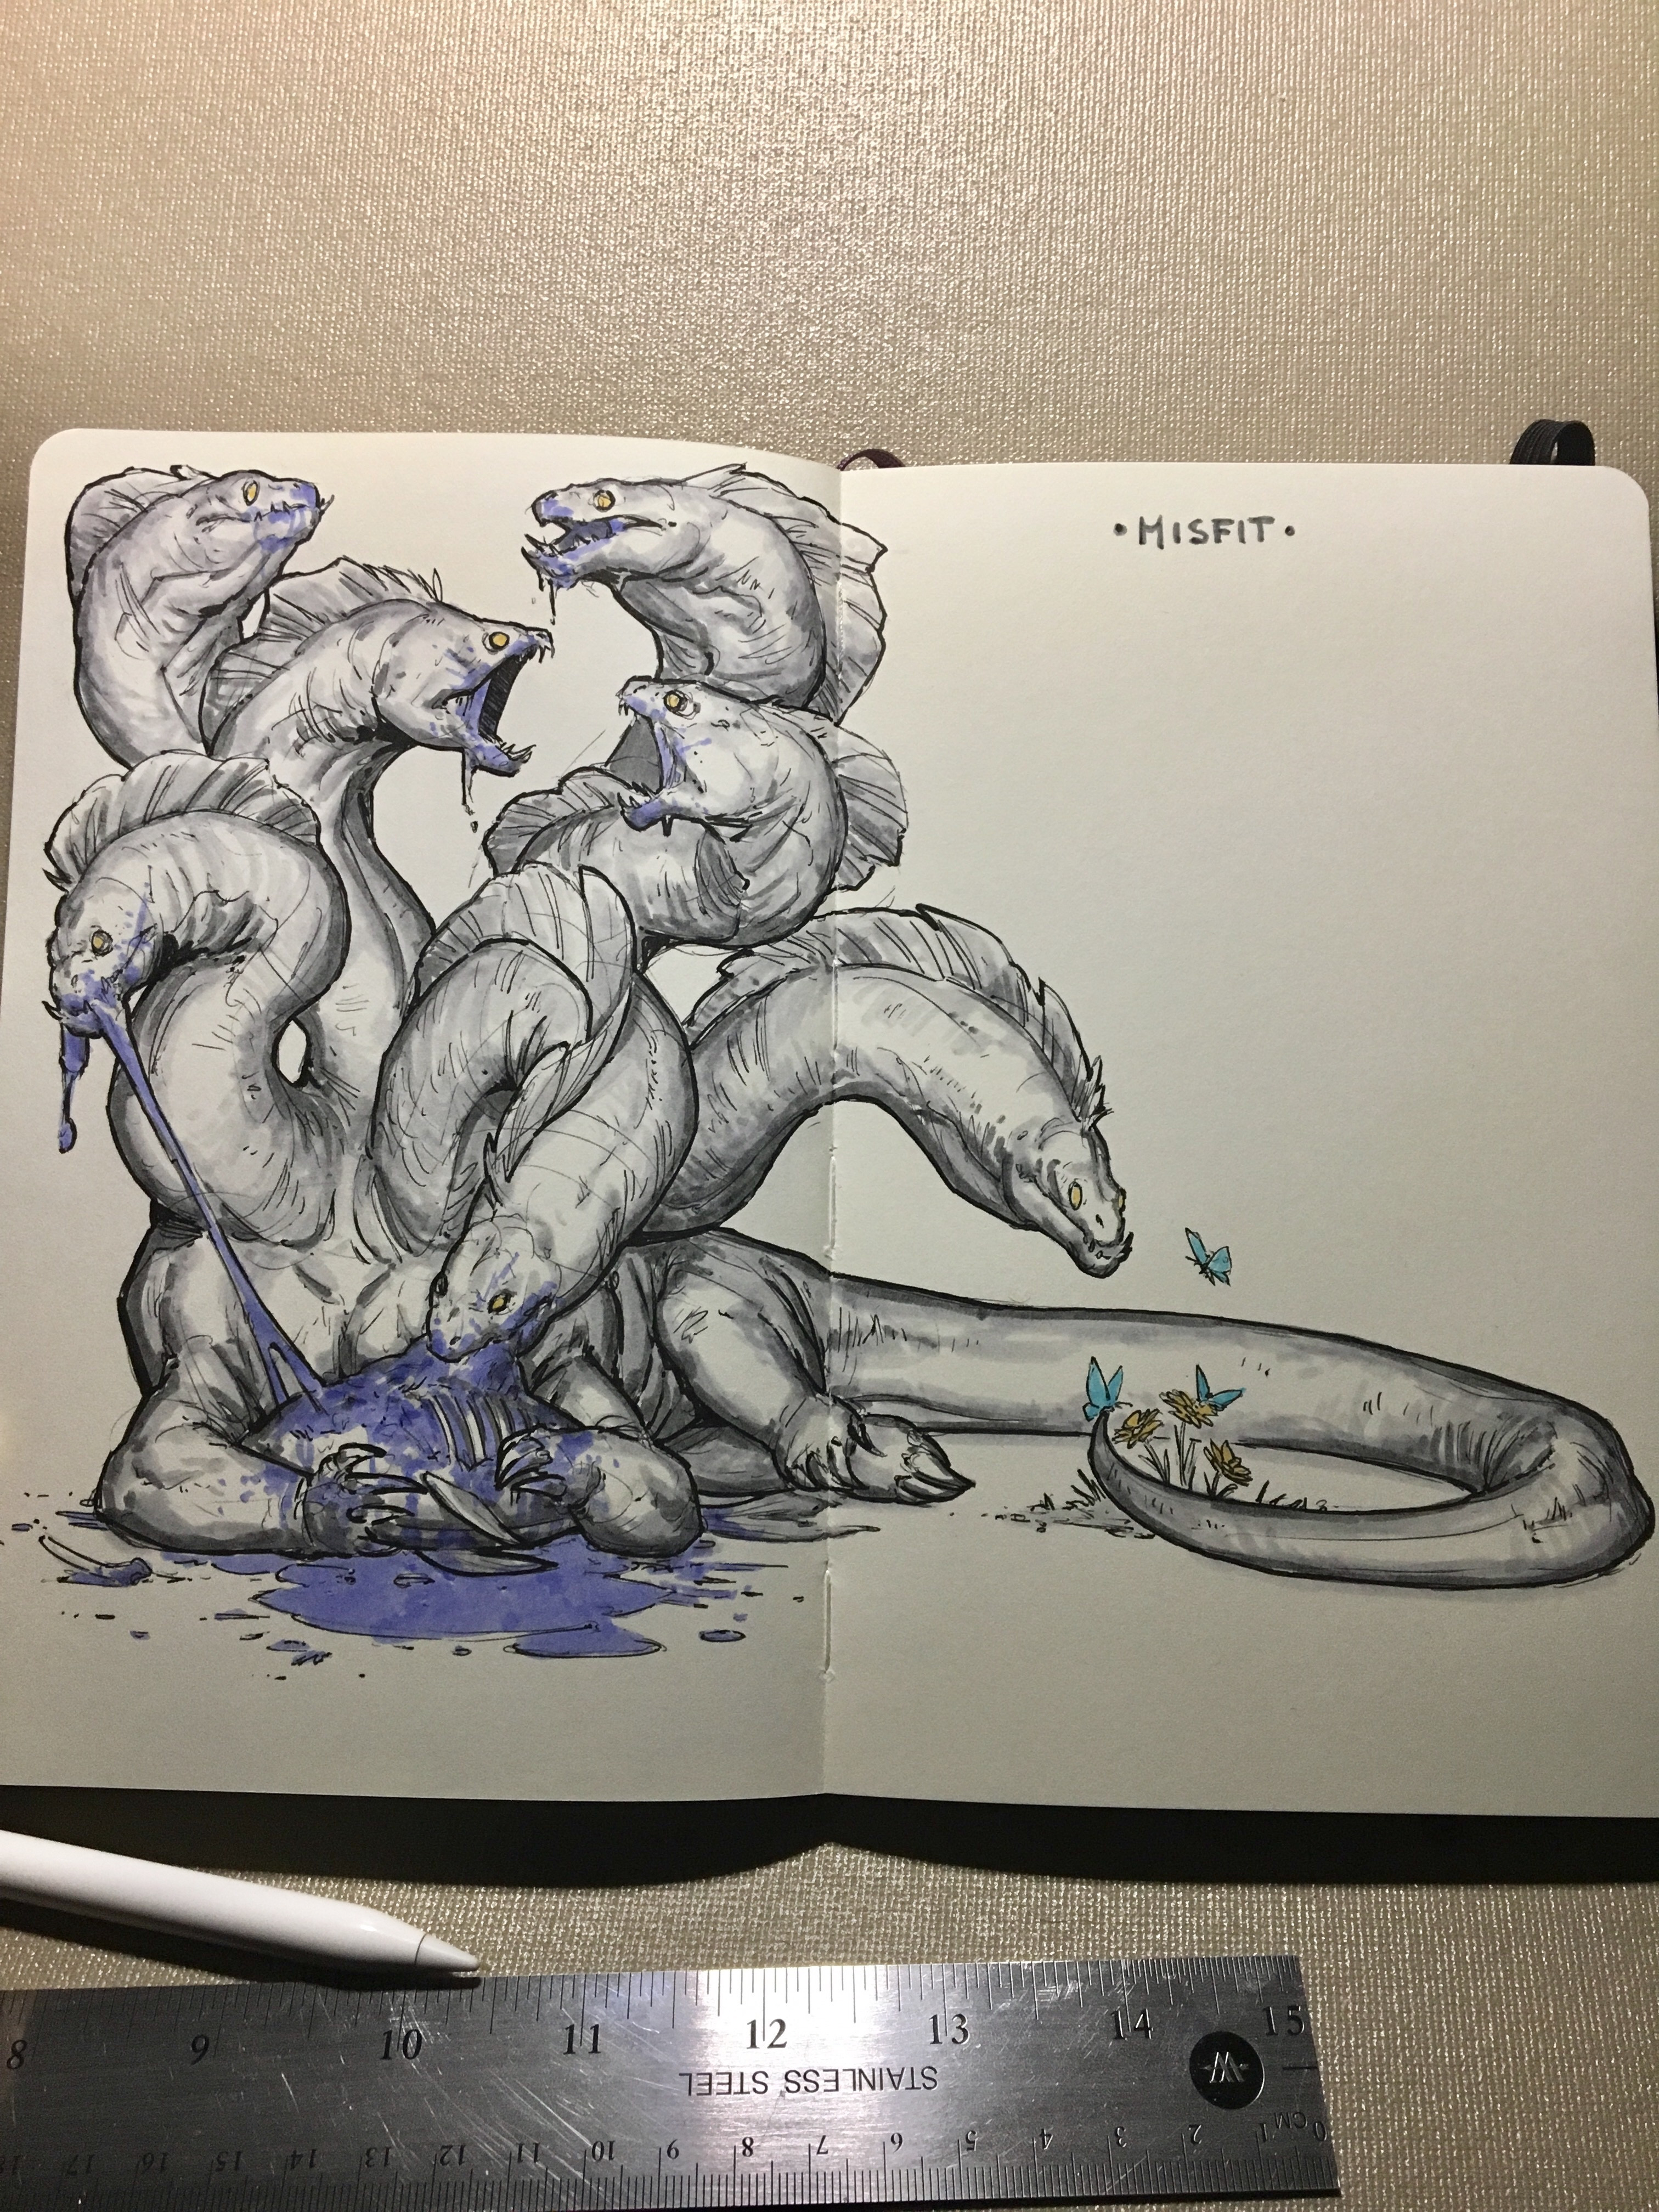 Day 18 of inktober 2019! Misfit! Having some fun with some hydra heads 😅 At least the blood is blue this time 😂😨